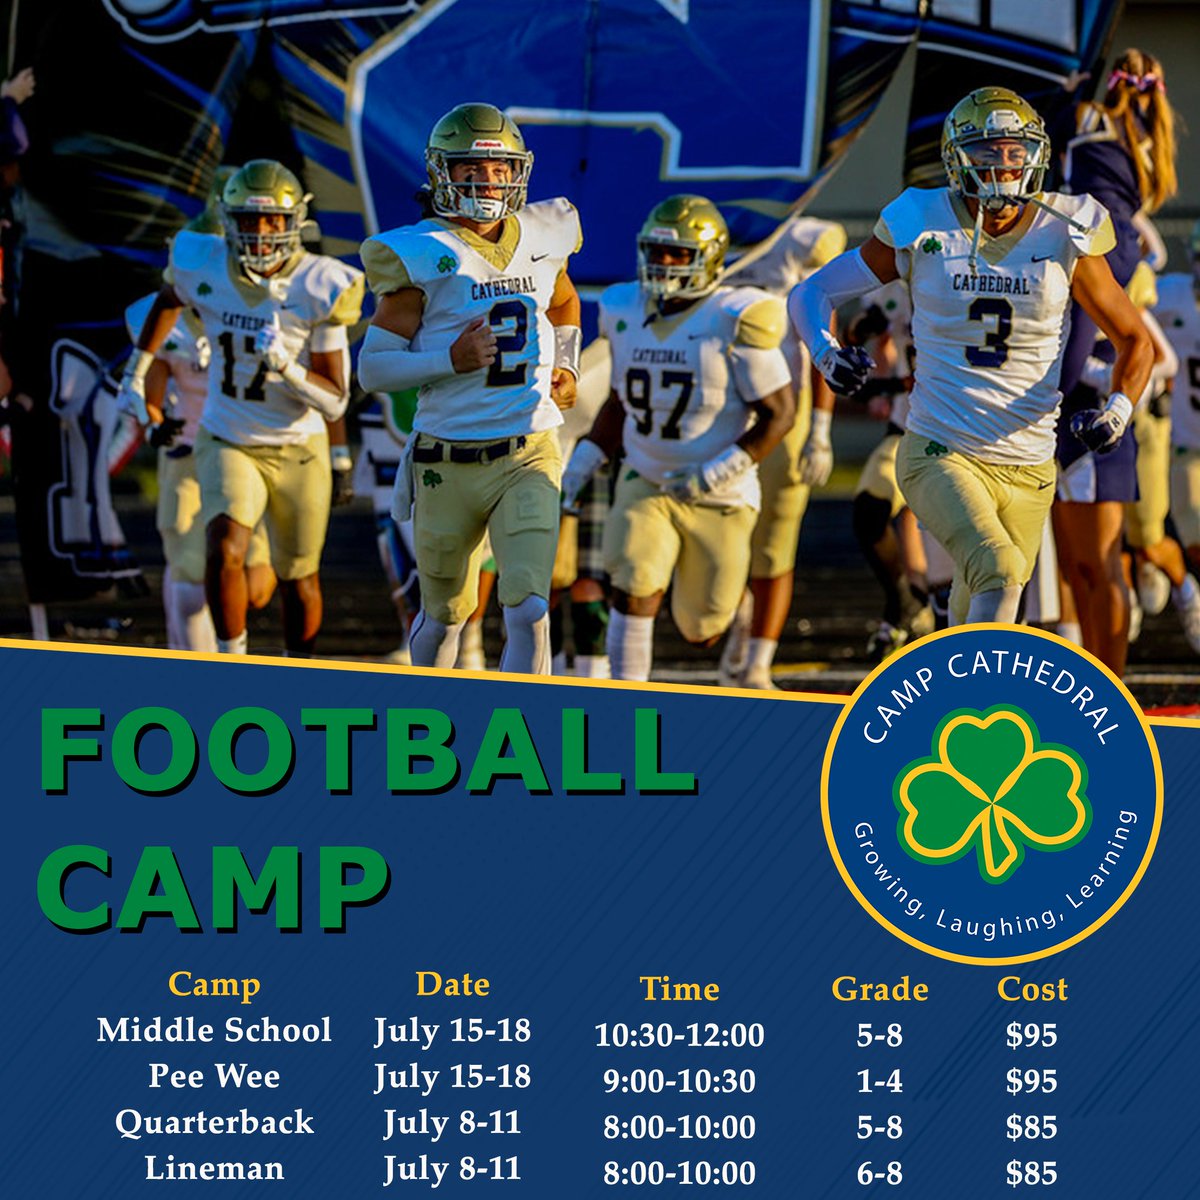 Join us this summer for ☘️🏈 Camp!!!